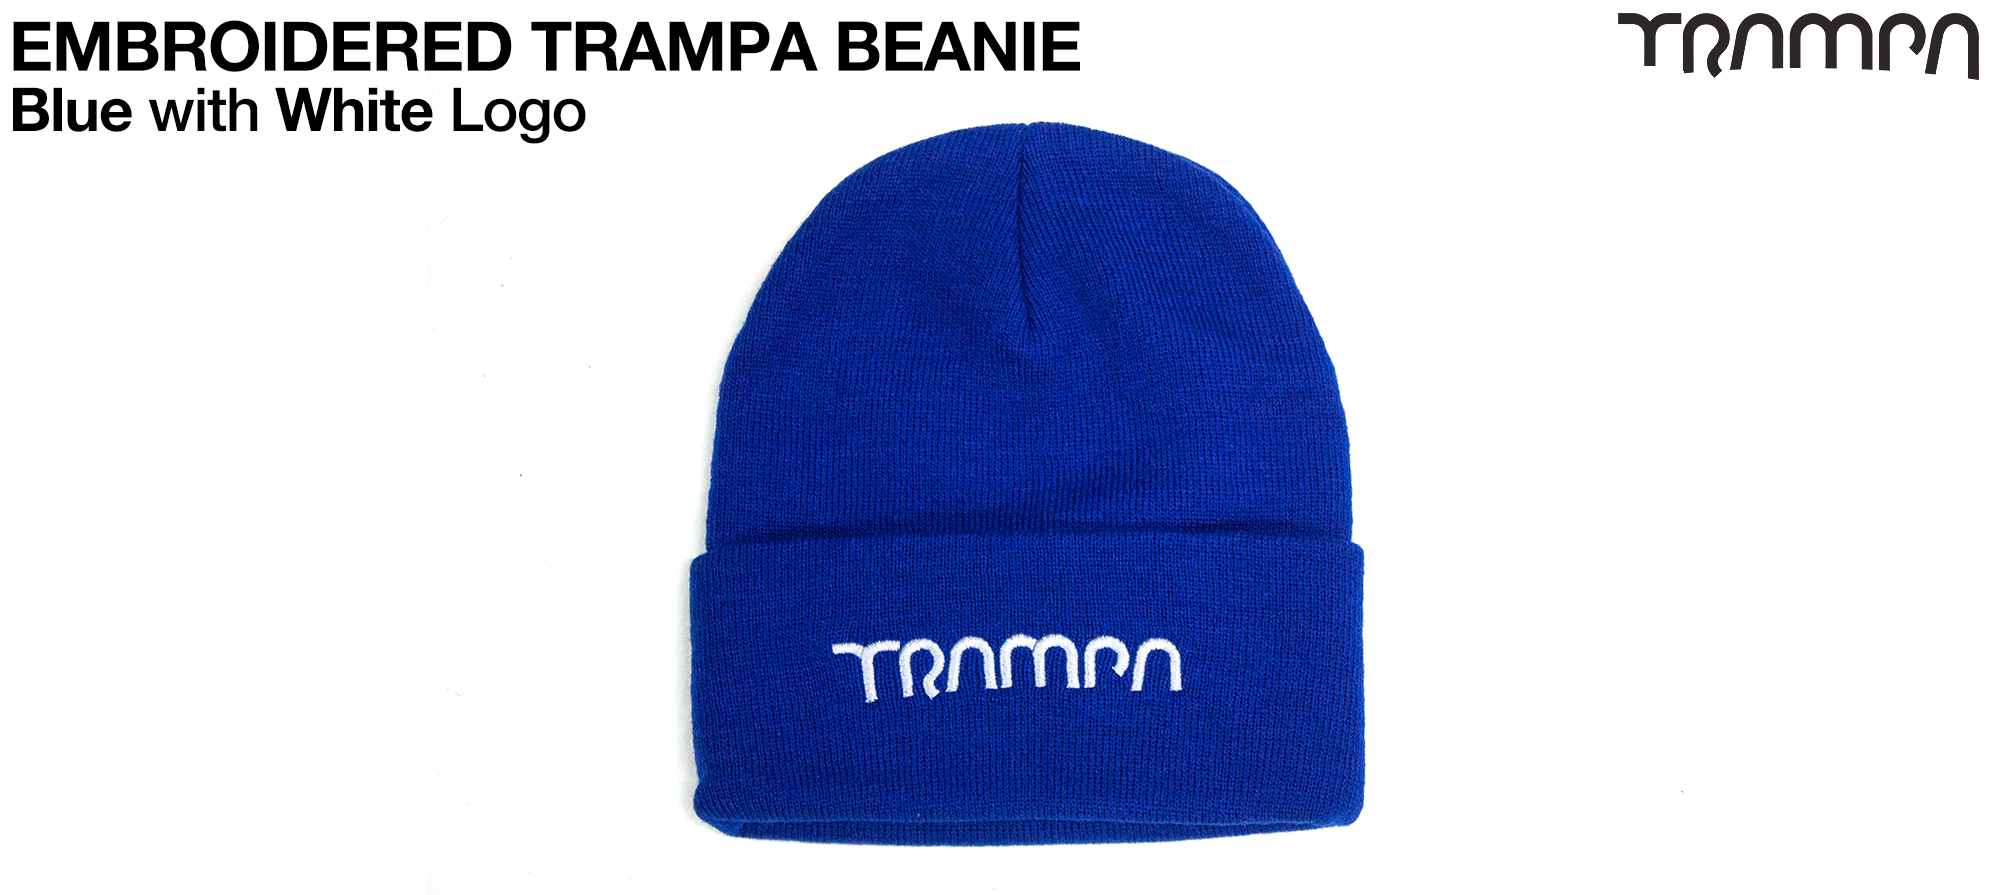 OXFORD BLUE Beanie with WHITE/SILVER TRAMPA Embroidery - Double thick turn over for extra warmth